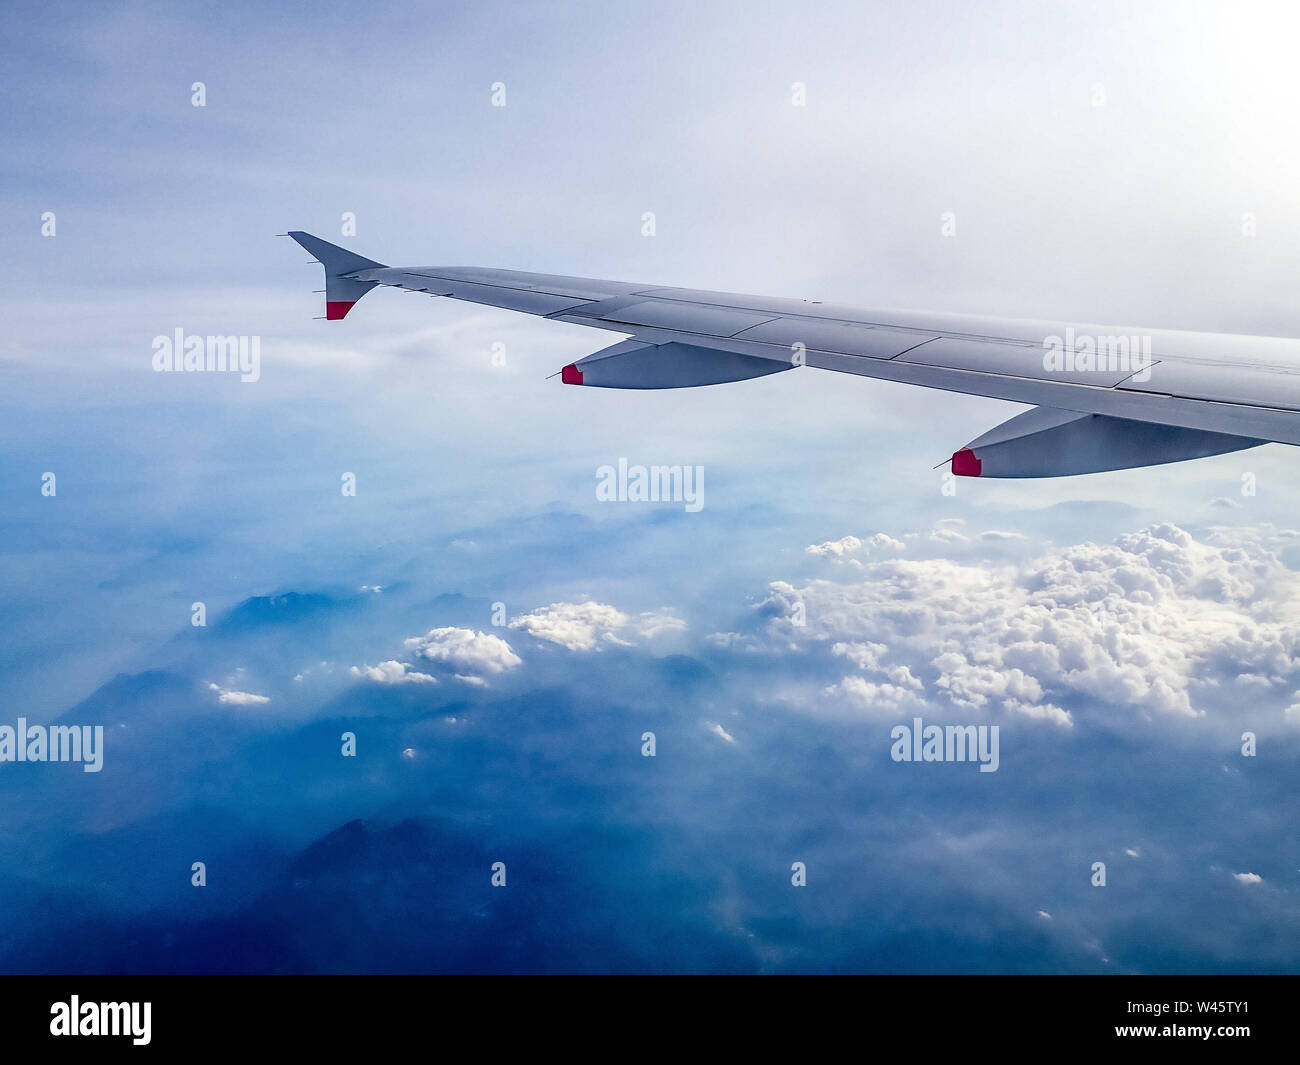 Venice, 16 July 2019. British Airways Airbus 319 in flight over Italy.  Photo by Enrique Shore/Alamy Stock Photo Stock Photo